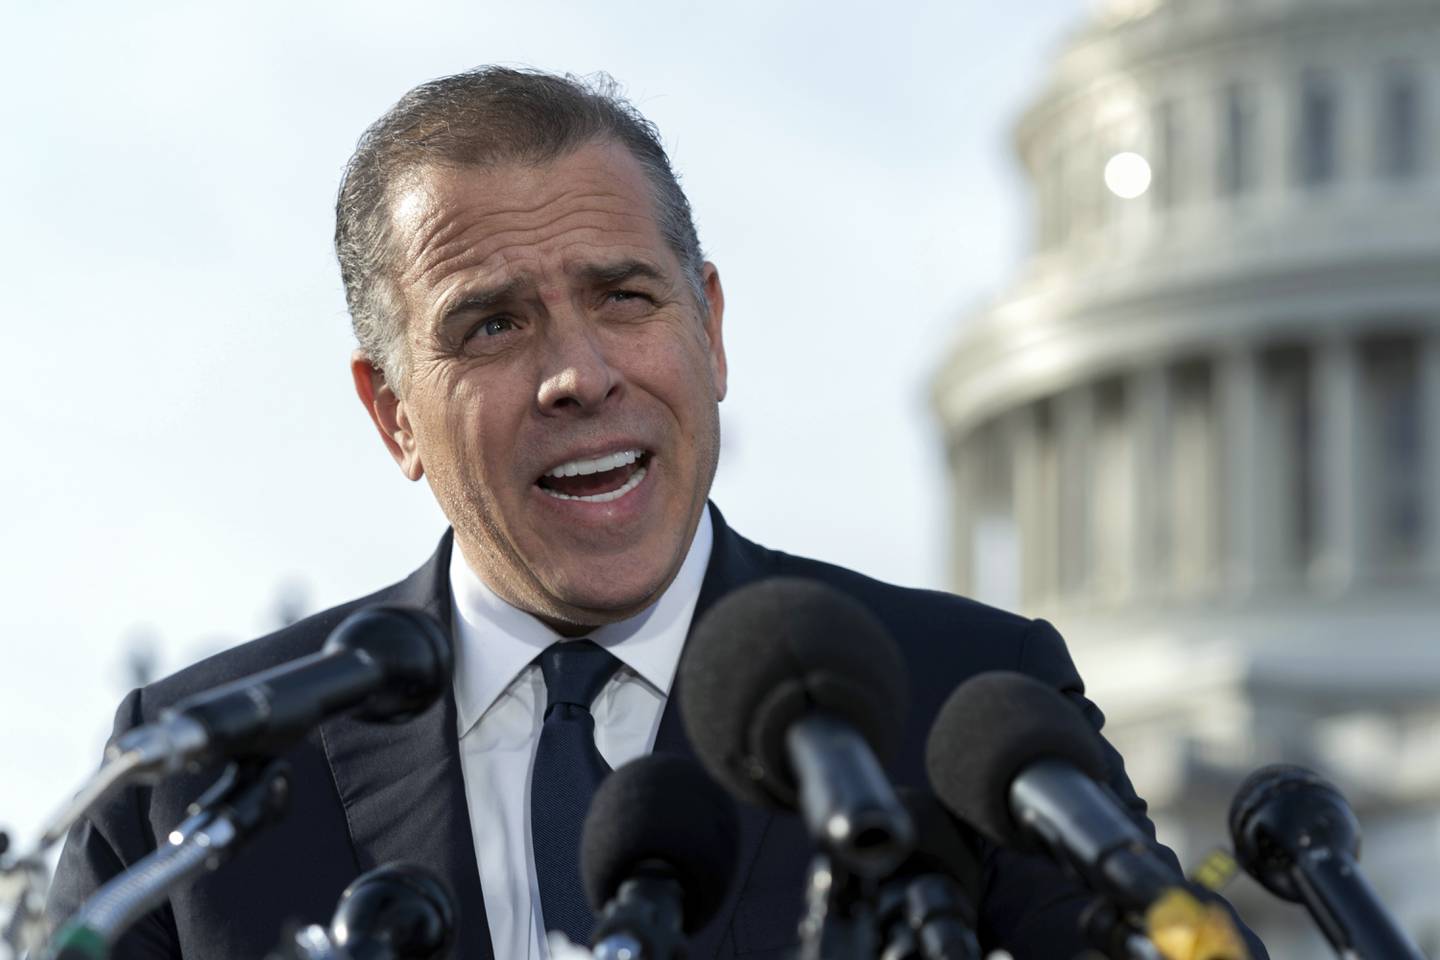 Hunter Biden, son of President Joe Biden, talks to reporters at the U.S. Capitol, in Washington, Wednesday, Dec. 13, 2023. Hunter Biden lashed out at Republican investigators who have been digging into his business dealings, insisting outside the Capitol he will only testify before a congressional committee in public. (AP Photo/Jose Luis Magana)